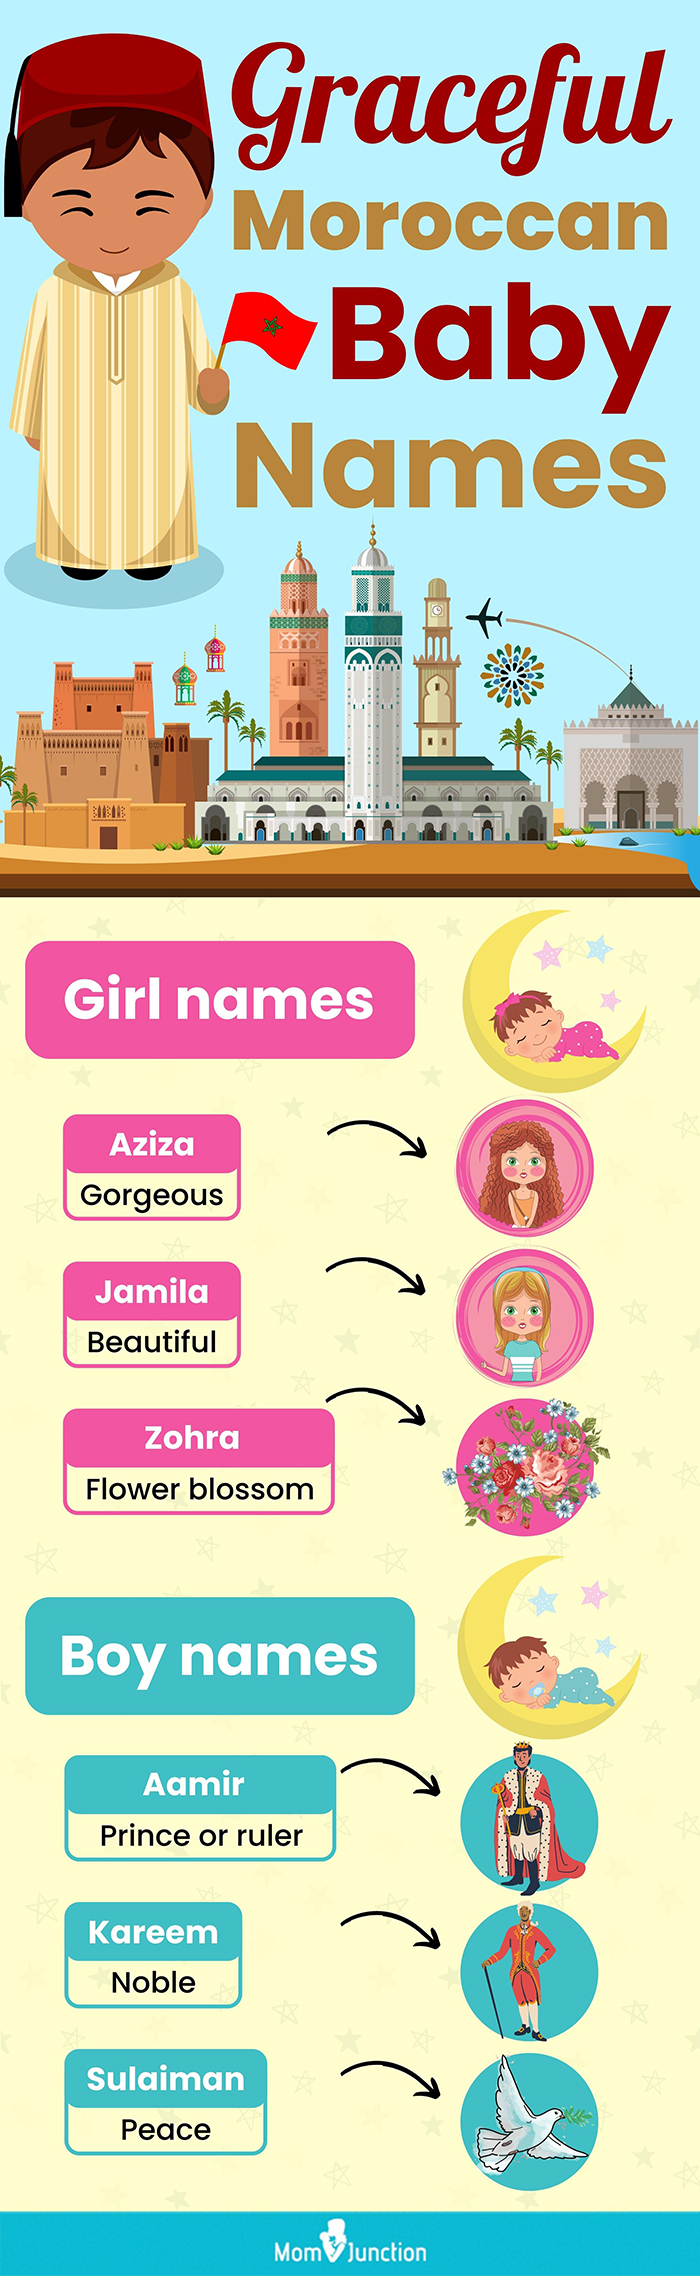 graceful moroccan baby names (infographic)